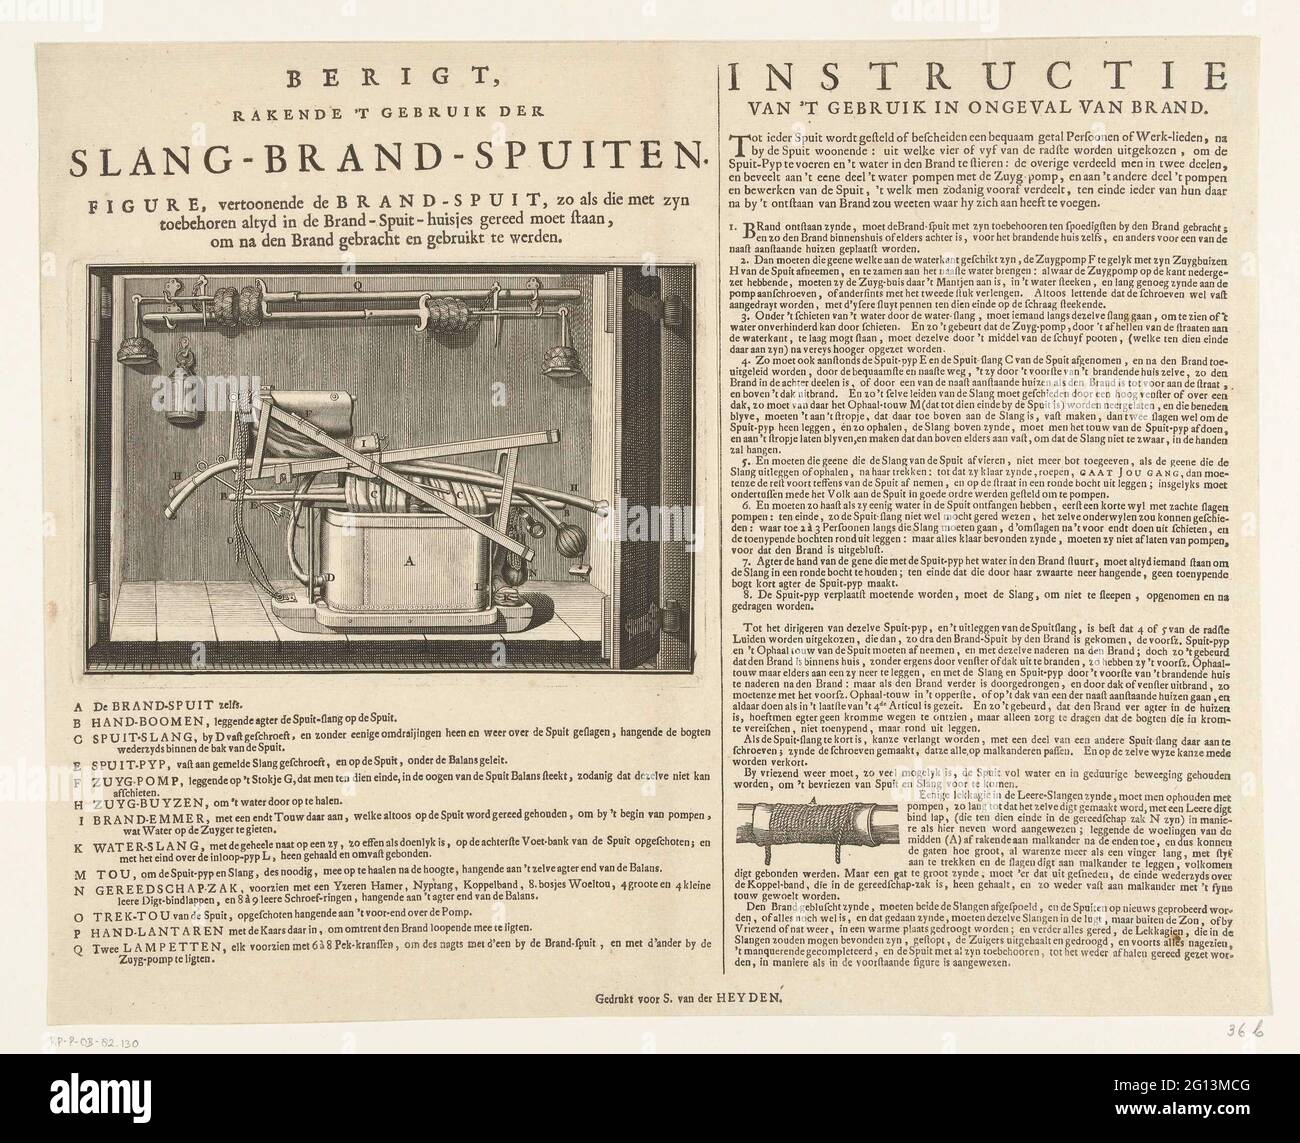 Instruction on the use of the hose fire sprayers, approx. 1720; BERT, touching the use of hose fire spuytes. Leaf with an instruction on correct use and storage of the hose fire sprayers, approx. 1720. On the left a show how the hose fire and pump must be stored in the fire spray house after use, with the legend A-Q. On the right a text sheet with the instruction for use in the event of a fire in 8 points and a picture of how a leakage must be repaired in a hose. Belongs to the top prayer at the fire eating book by Jan van der Heyden. Stock Photo